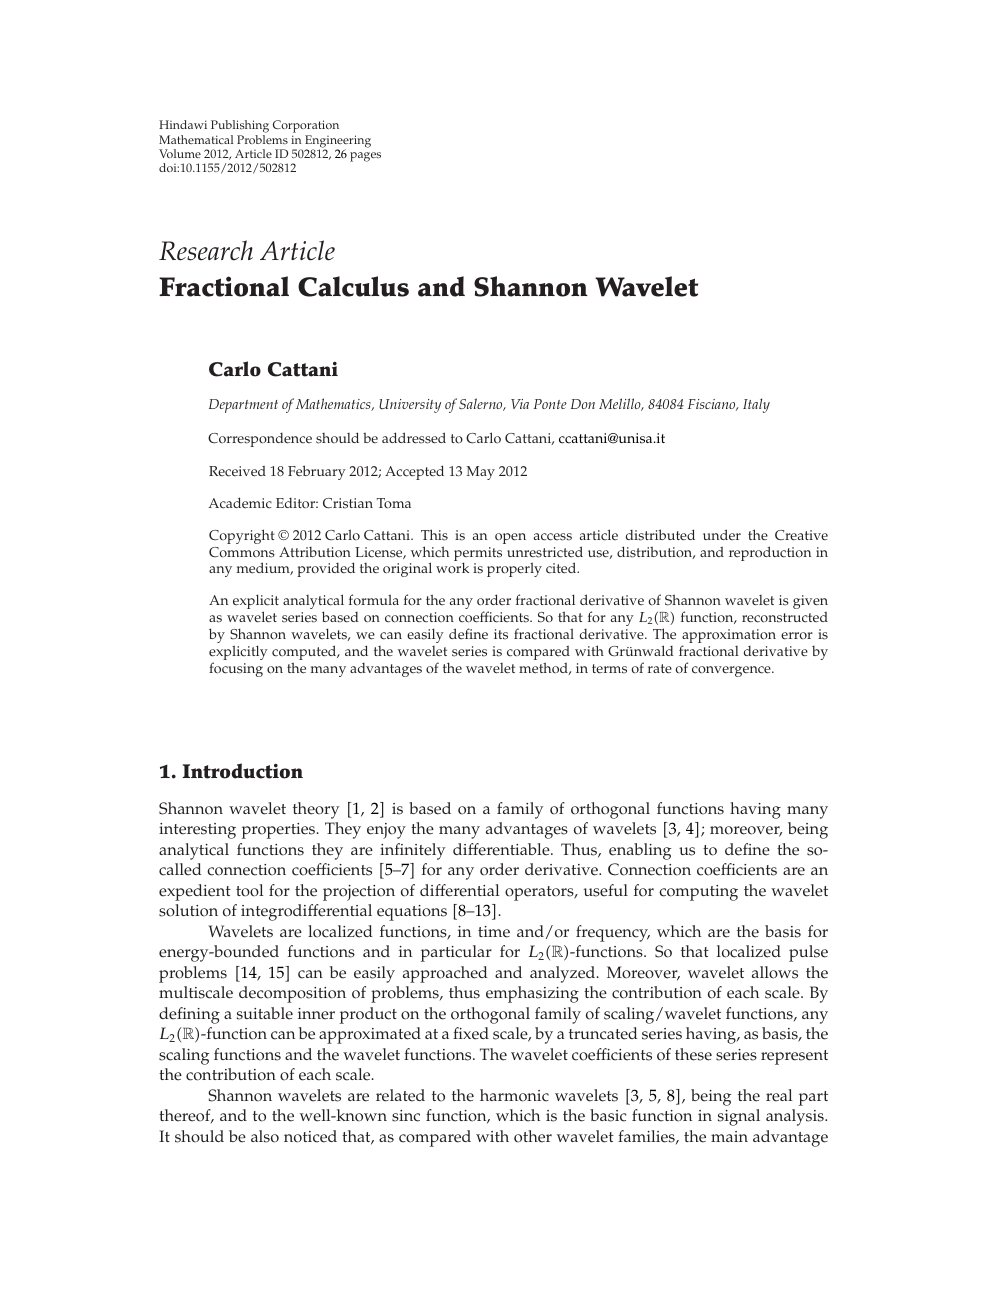 Fractional Calculus And Shannon Wavelet Topic Of Research Paper In Mathematics Download Scholarly Article Pdf And Read For Free On Cyberleninka Open Science Hub